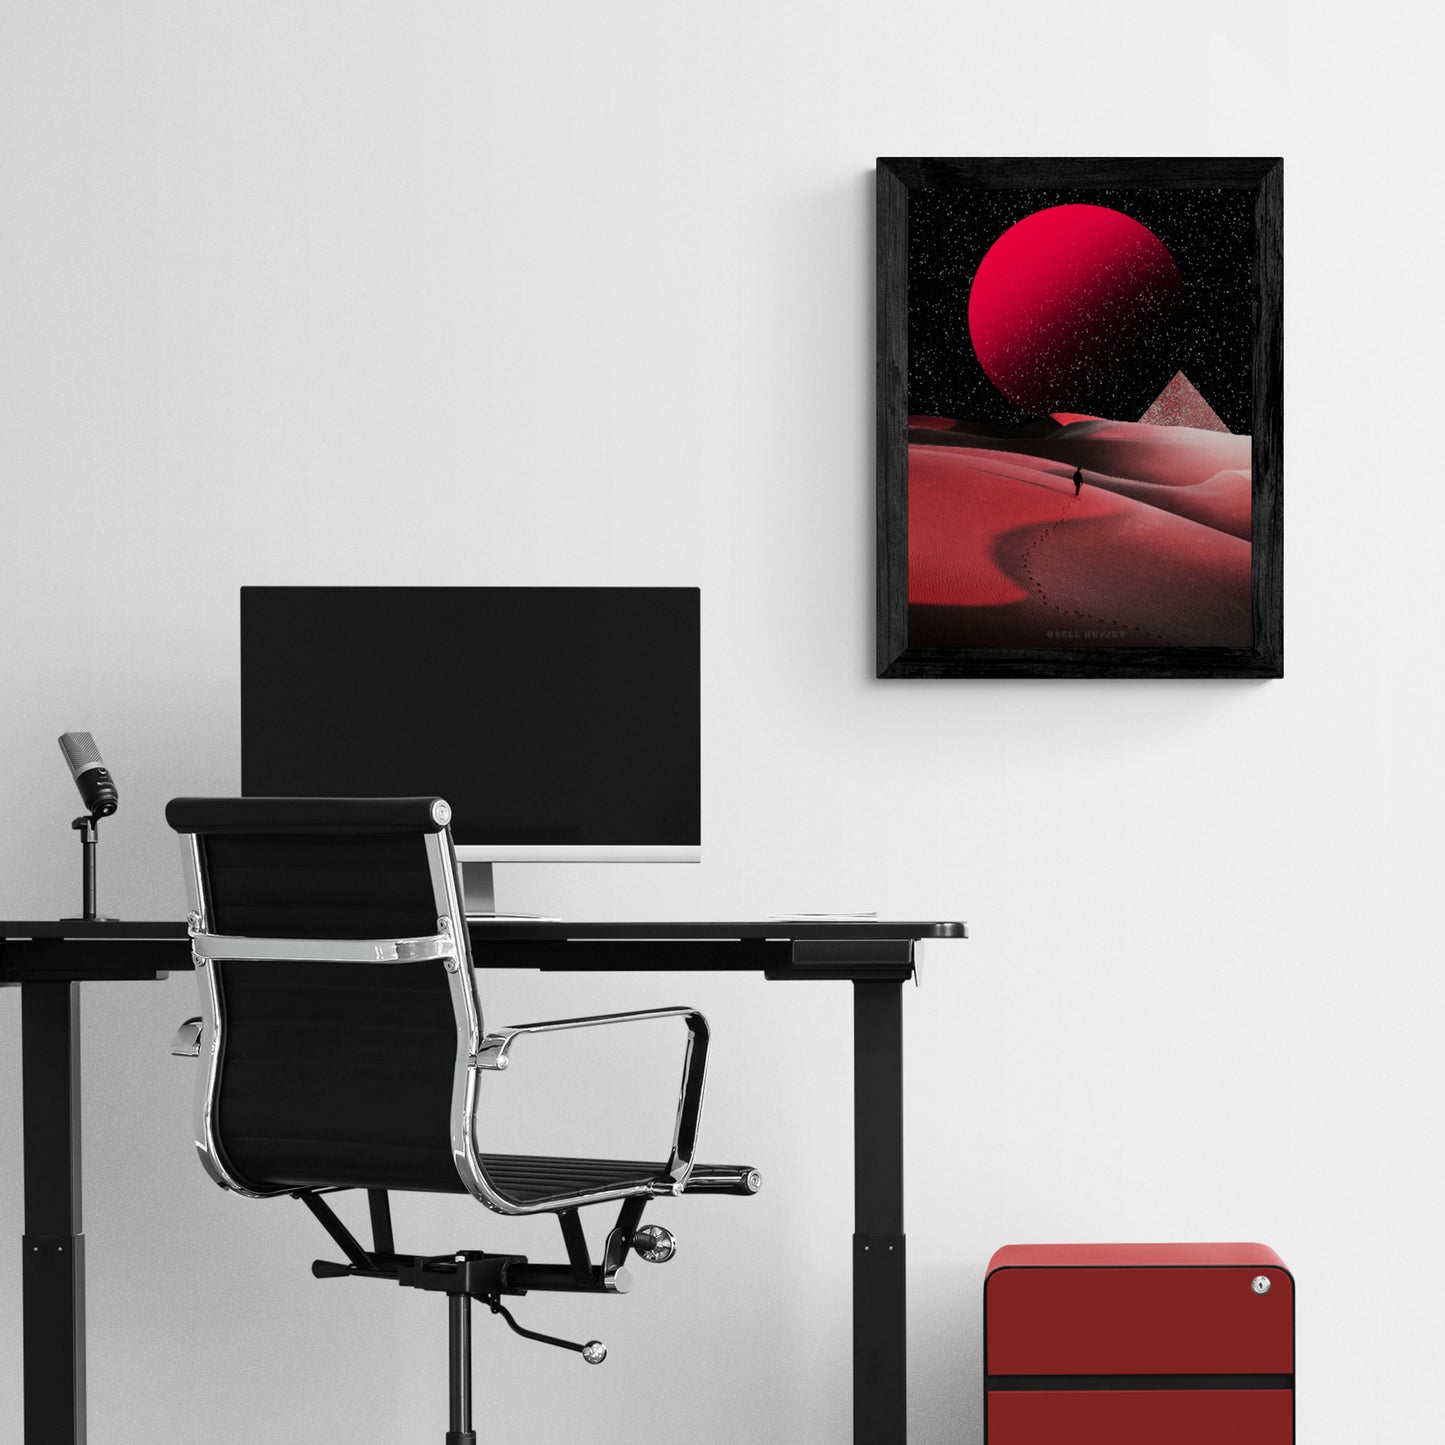 Red Planet Explore 18X24 Inch Poster Print for Sci-fi & Surreal art fans